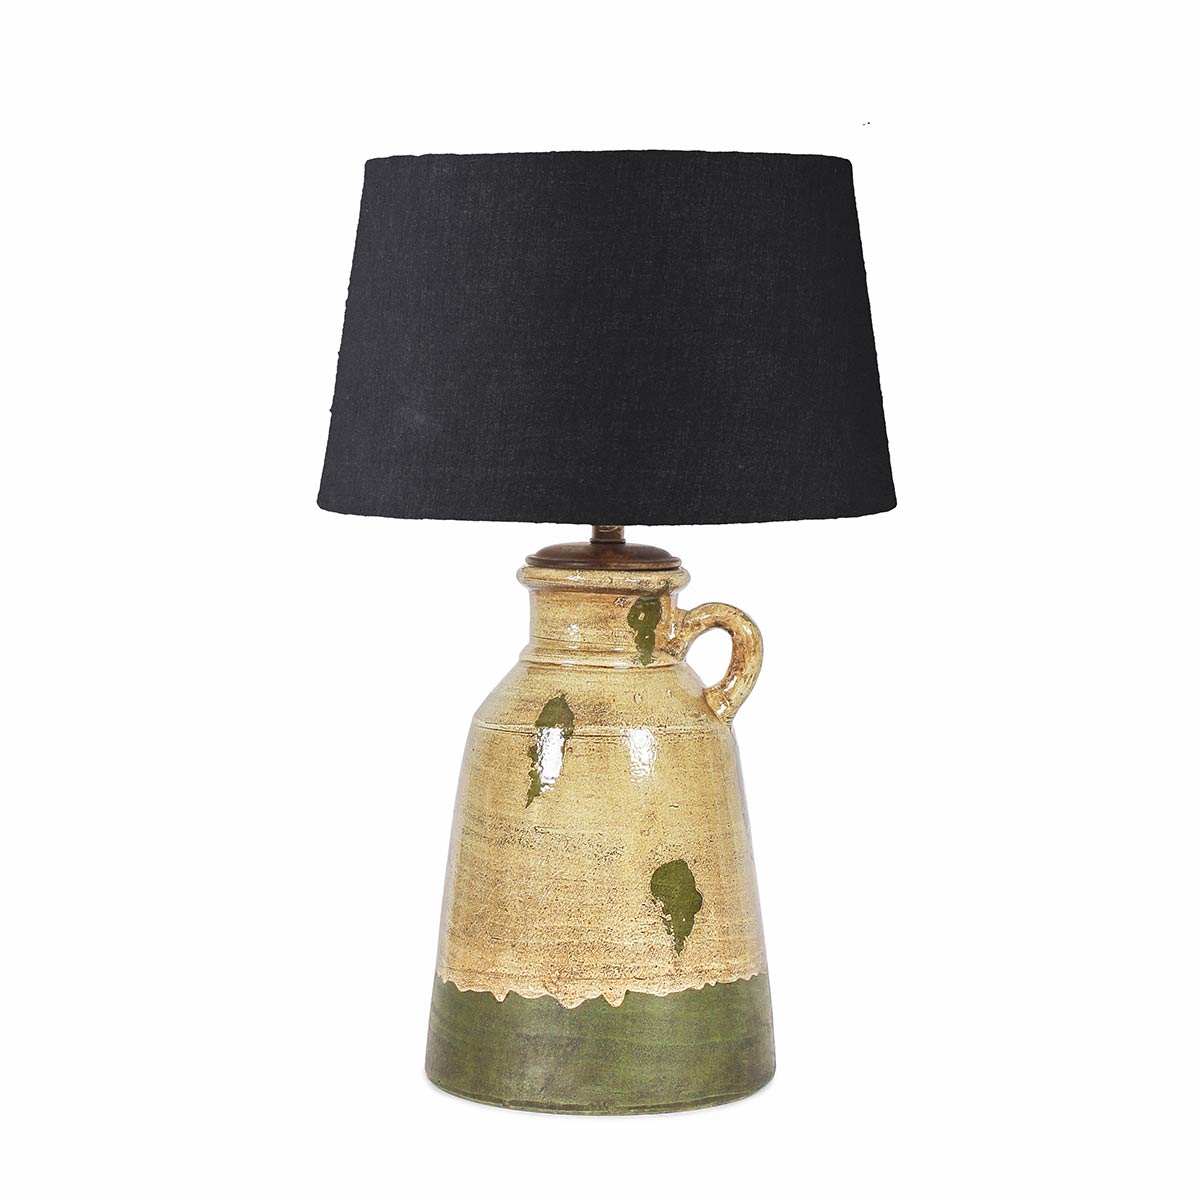 Table lamp Online